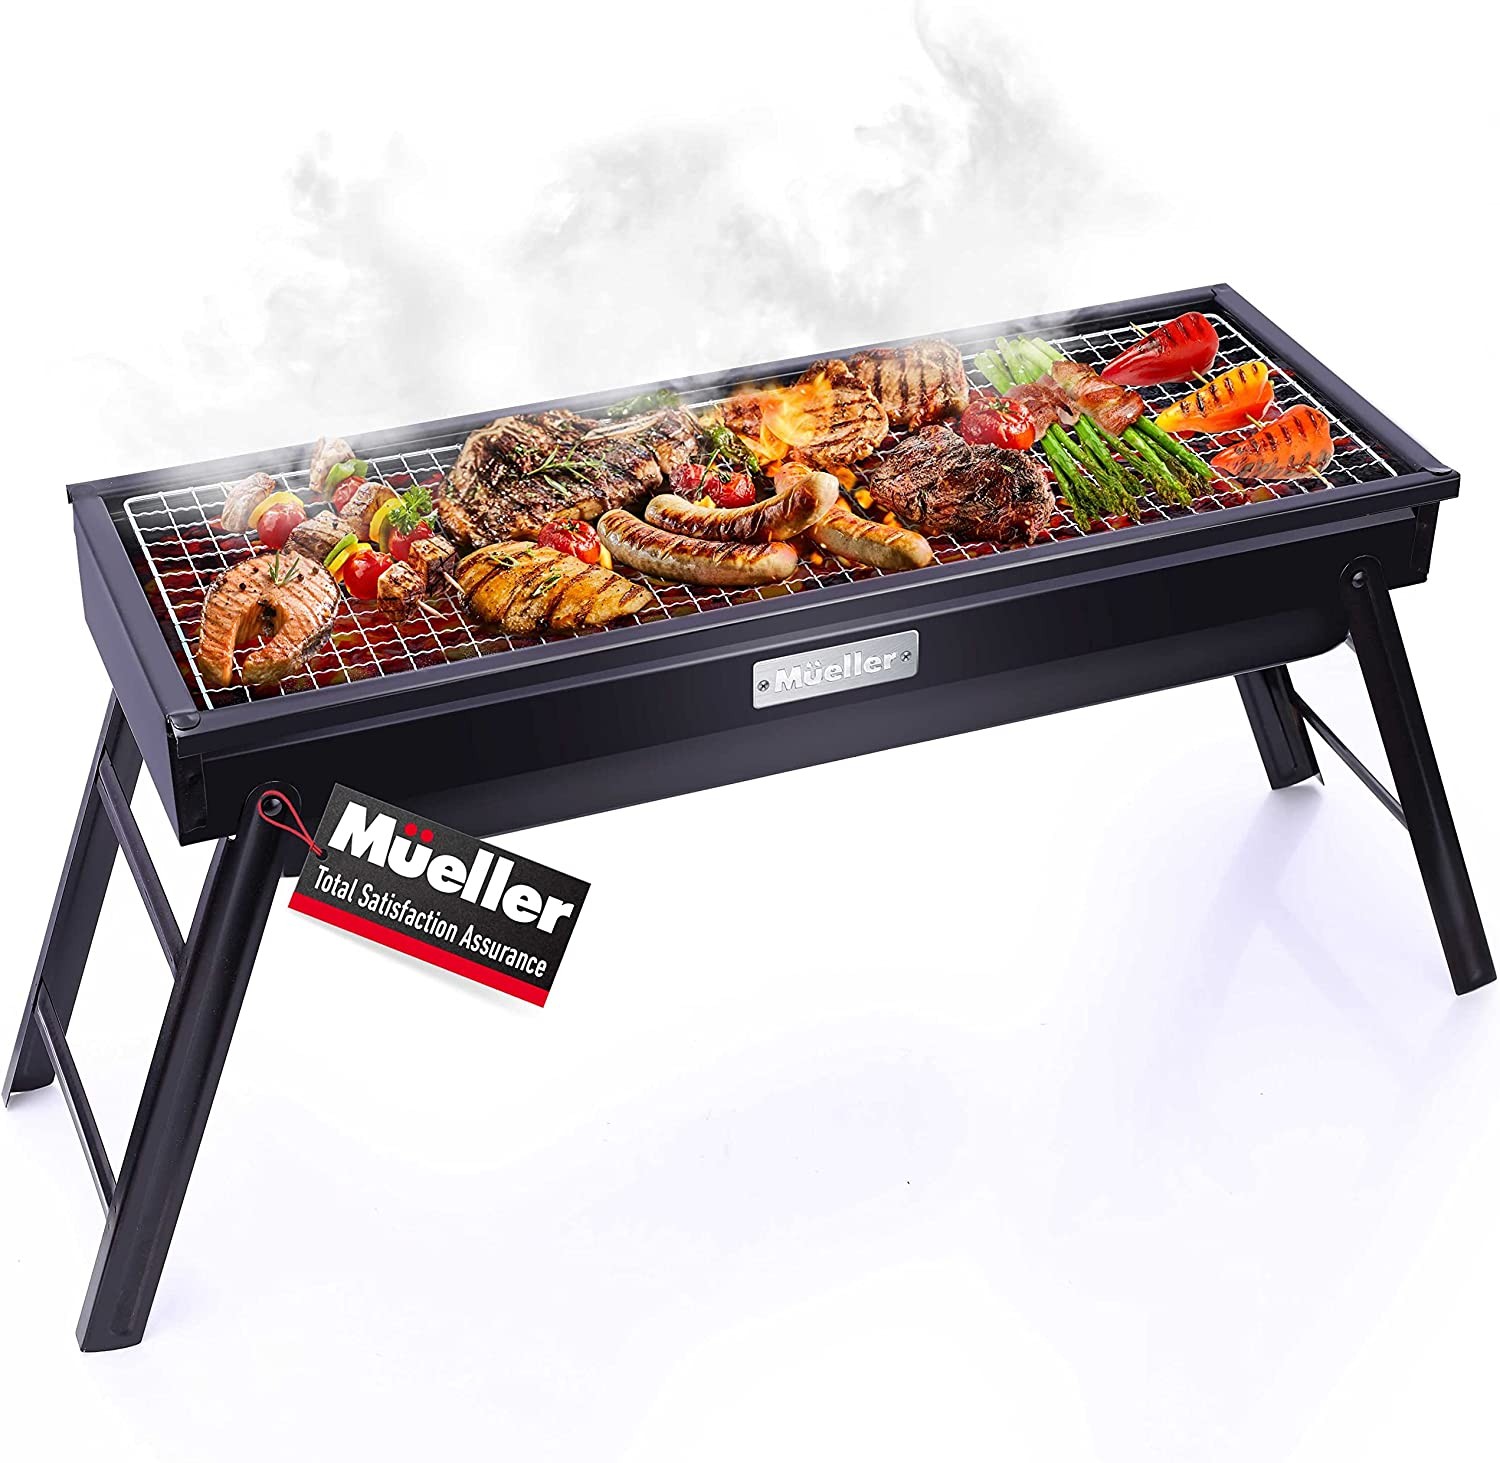 Mueller Portable Charcoal Grill and Smoker